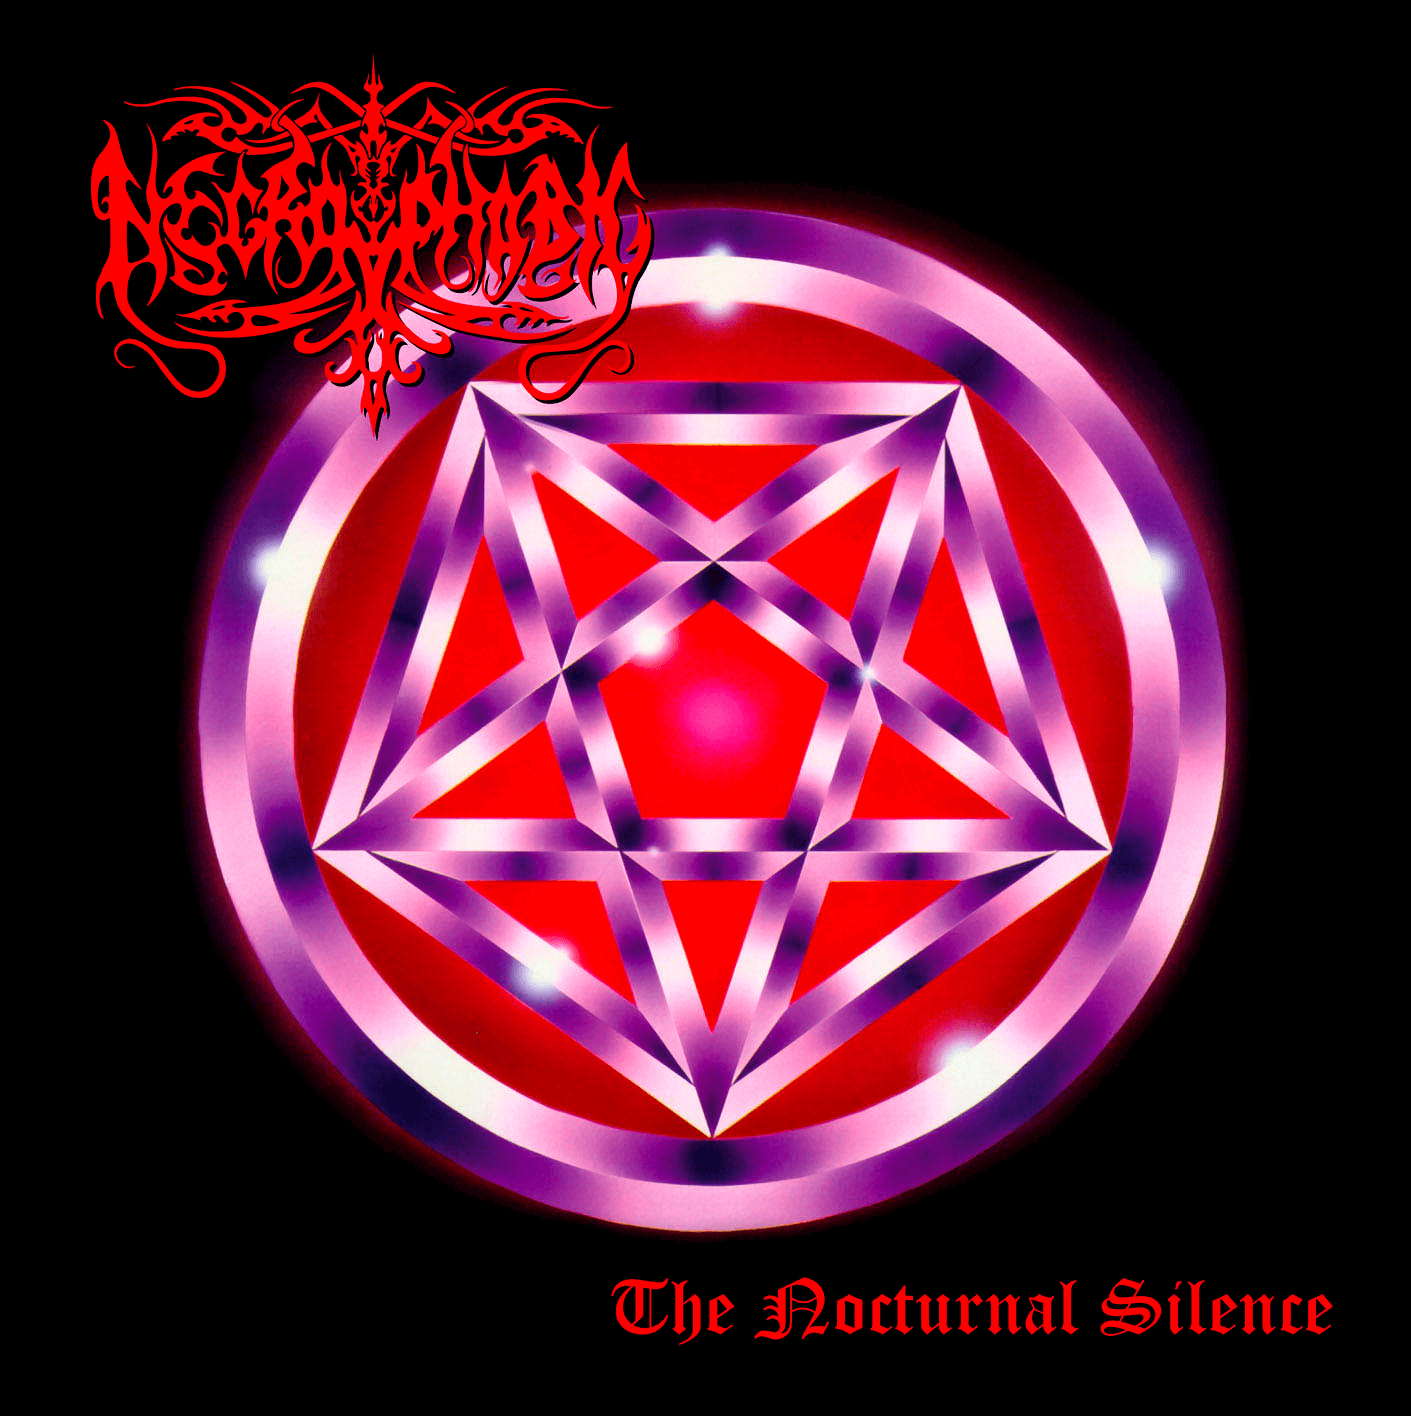 Necrophobic's The Nocturnal Silence (Deathcore).